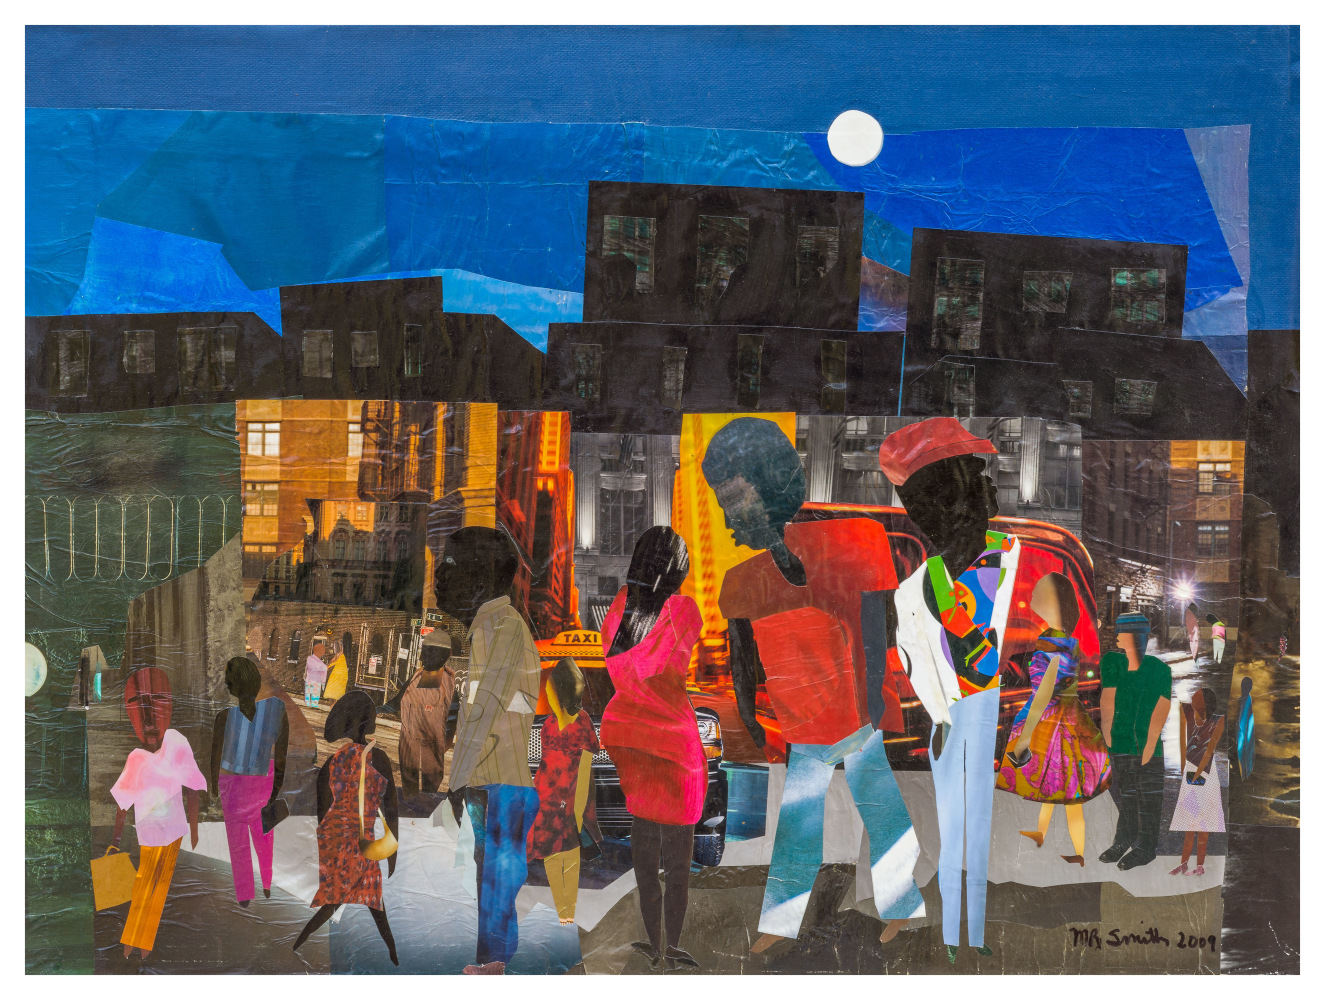 Melvin Smith, Chicago at Night Paper, 2009, collage on canvas, 30 x 40in.